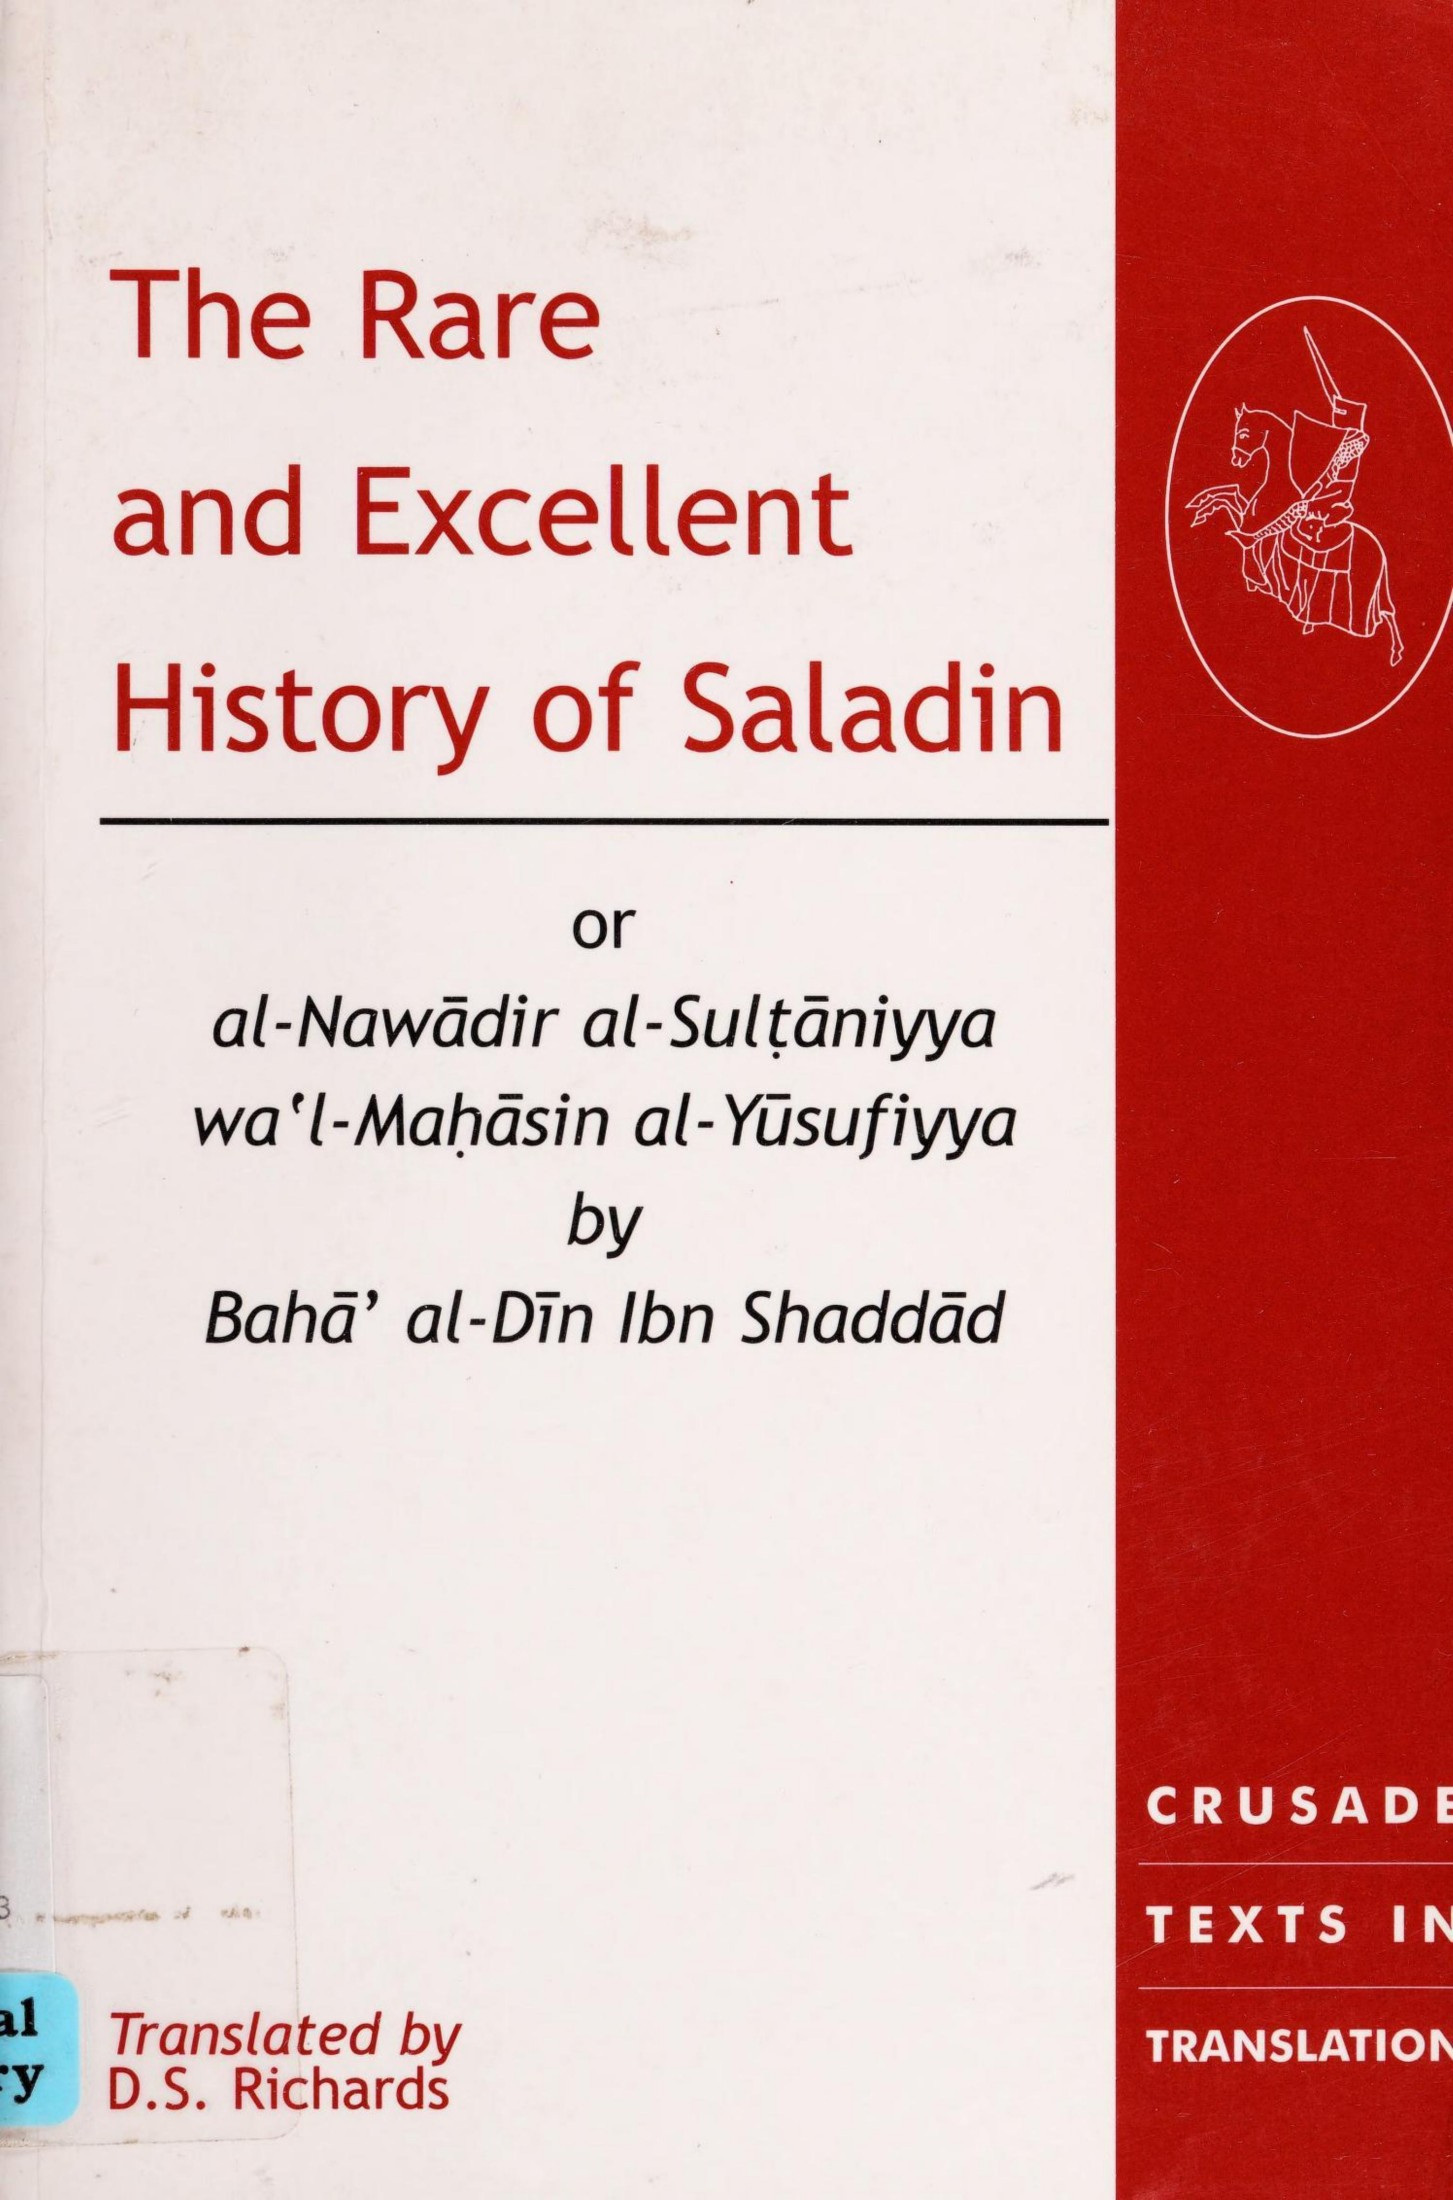 The Rare and Excellent History of Saladin 2002